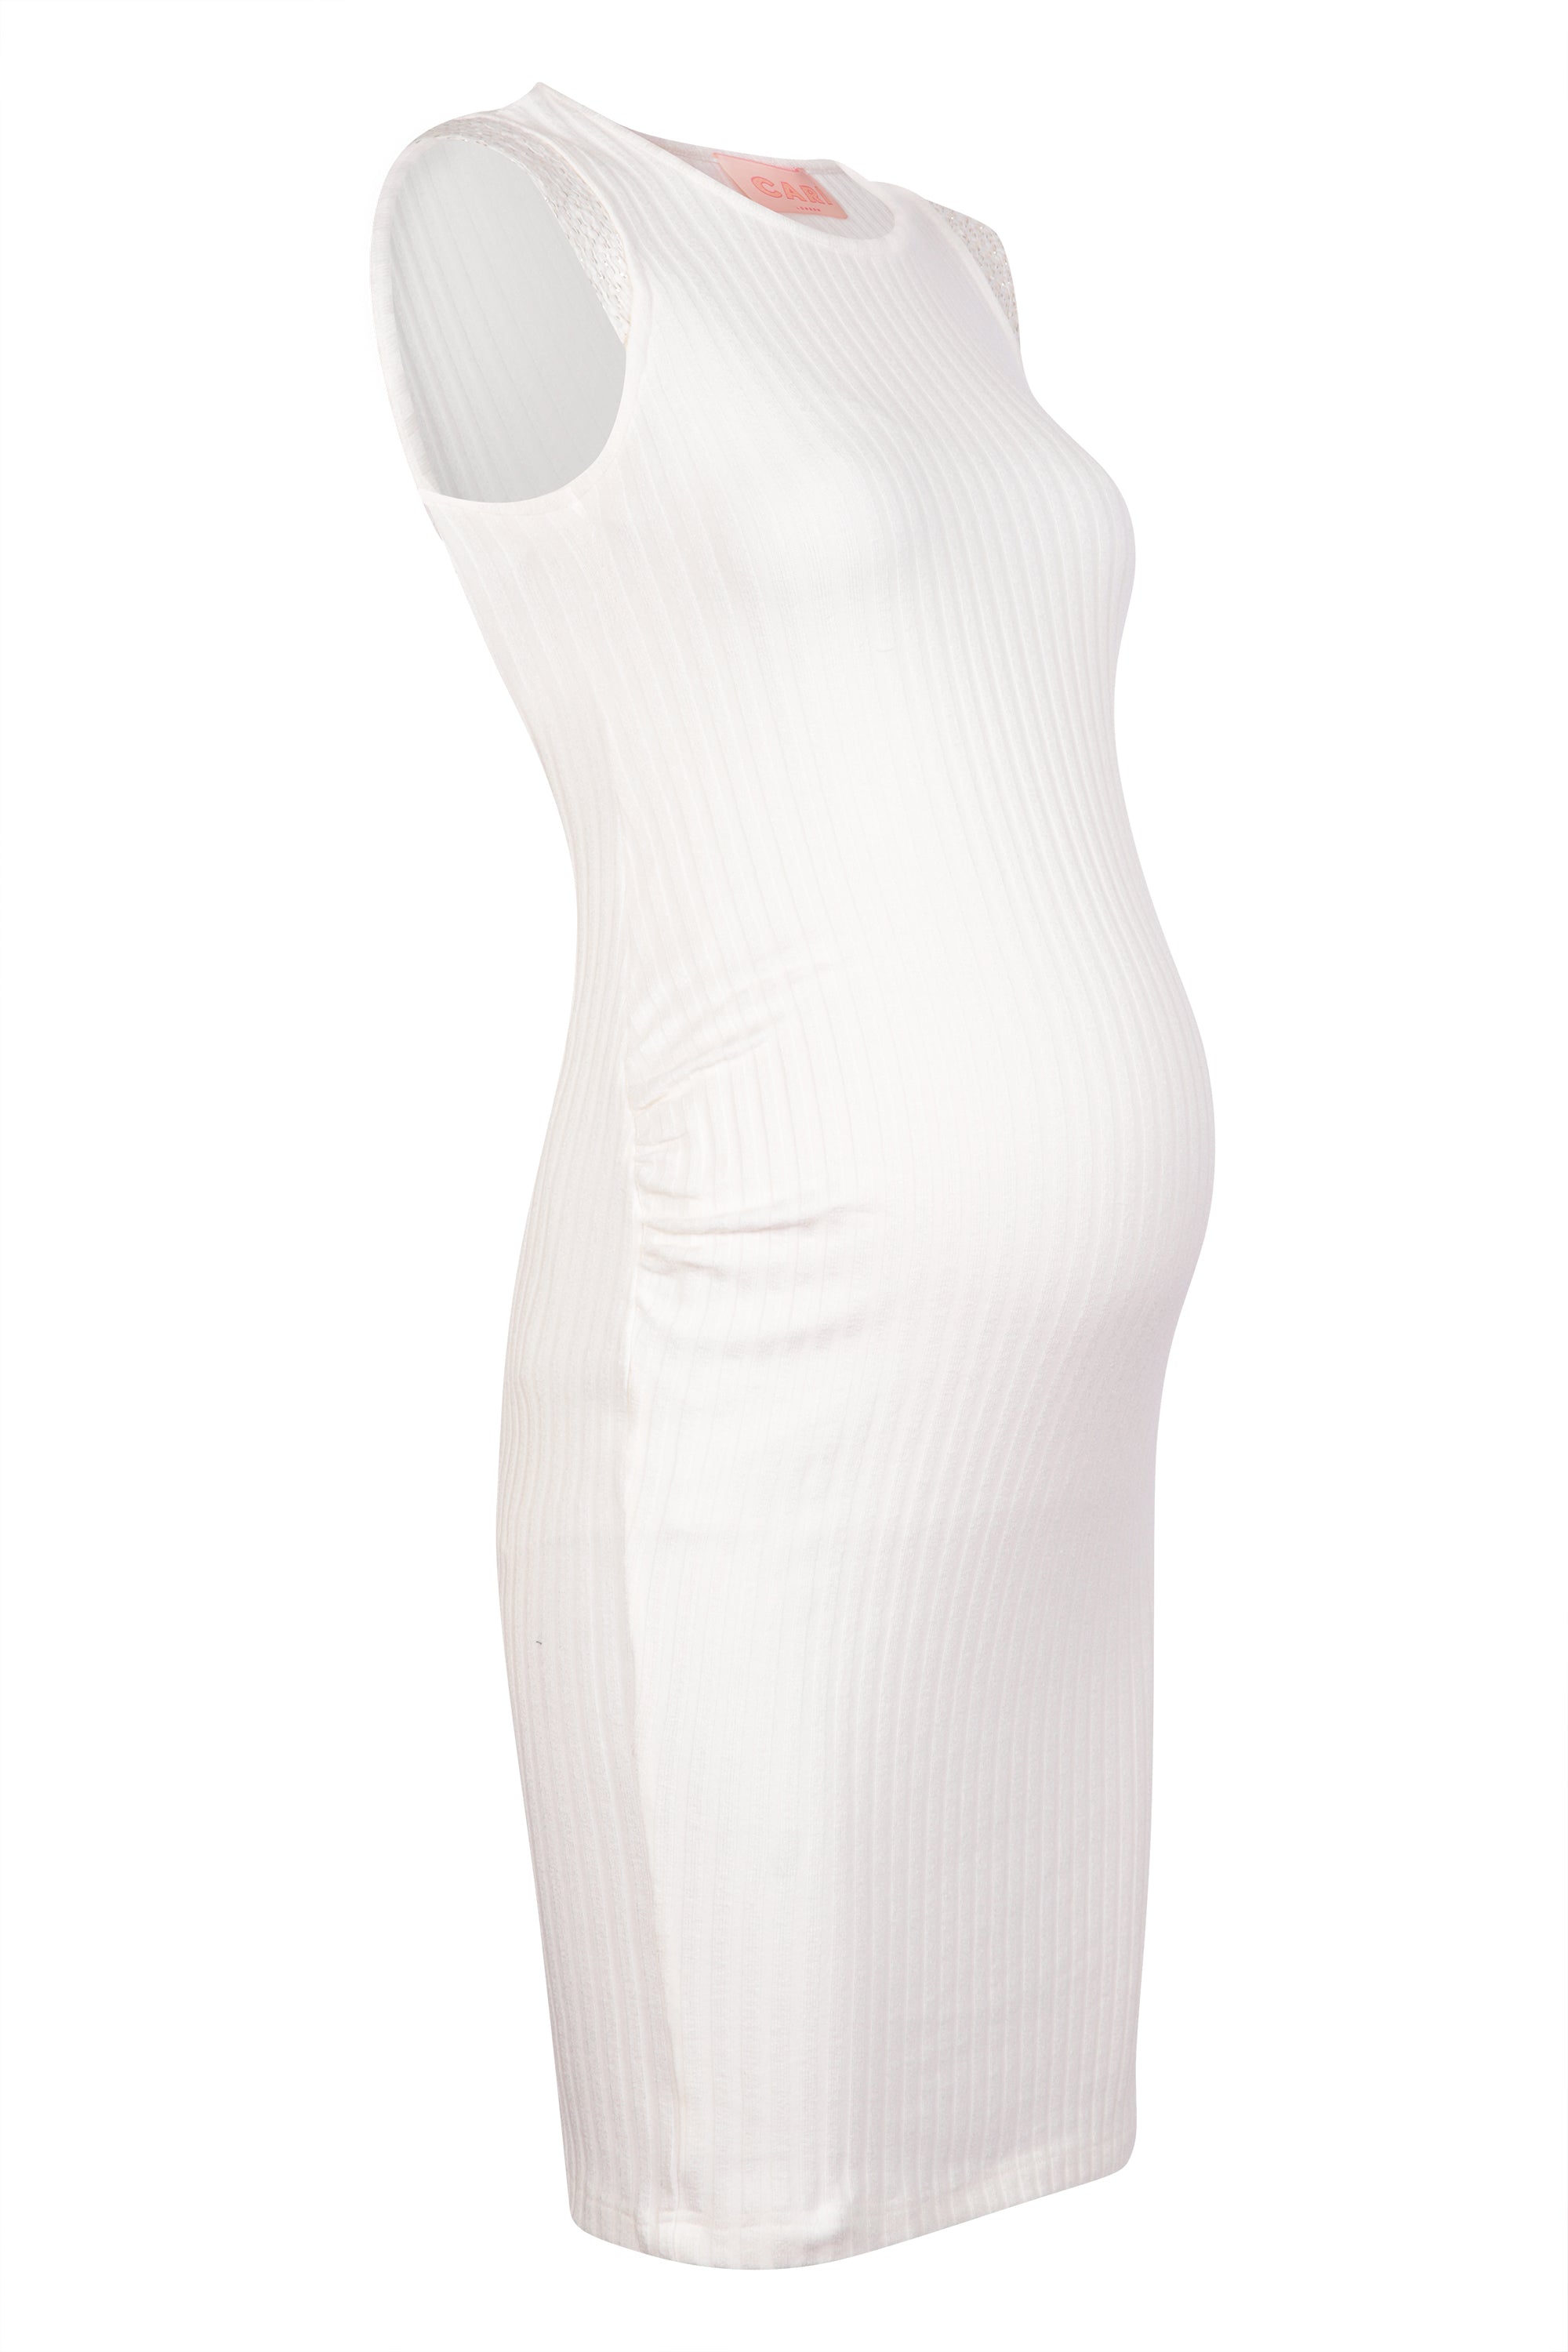 Soft silky ivory rib with gold and cream shoulder panels, CARI’s signature body con maternity dress in above-the-knee length is ideal for special occasions. Designed to flatter the bump, with fabric that feels soft against your skin while keeping you cool. An essential for the summer maternity wardrobe.